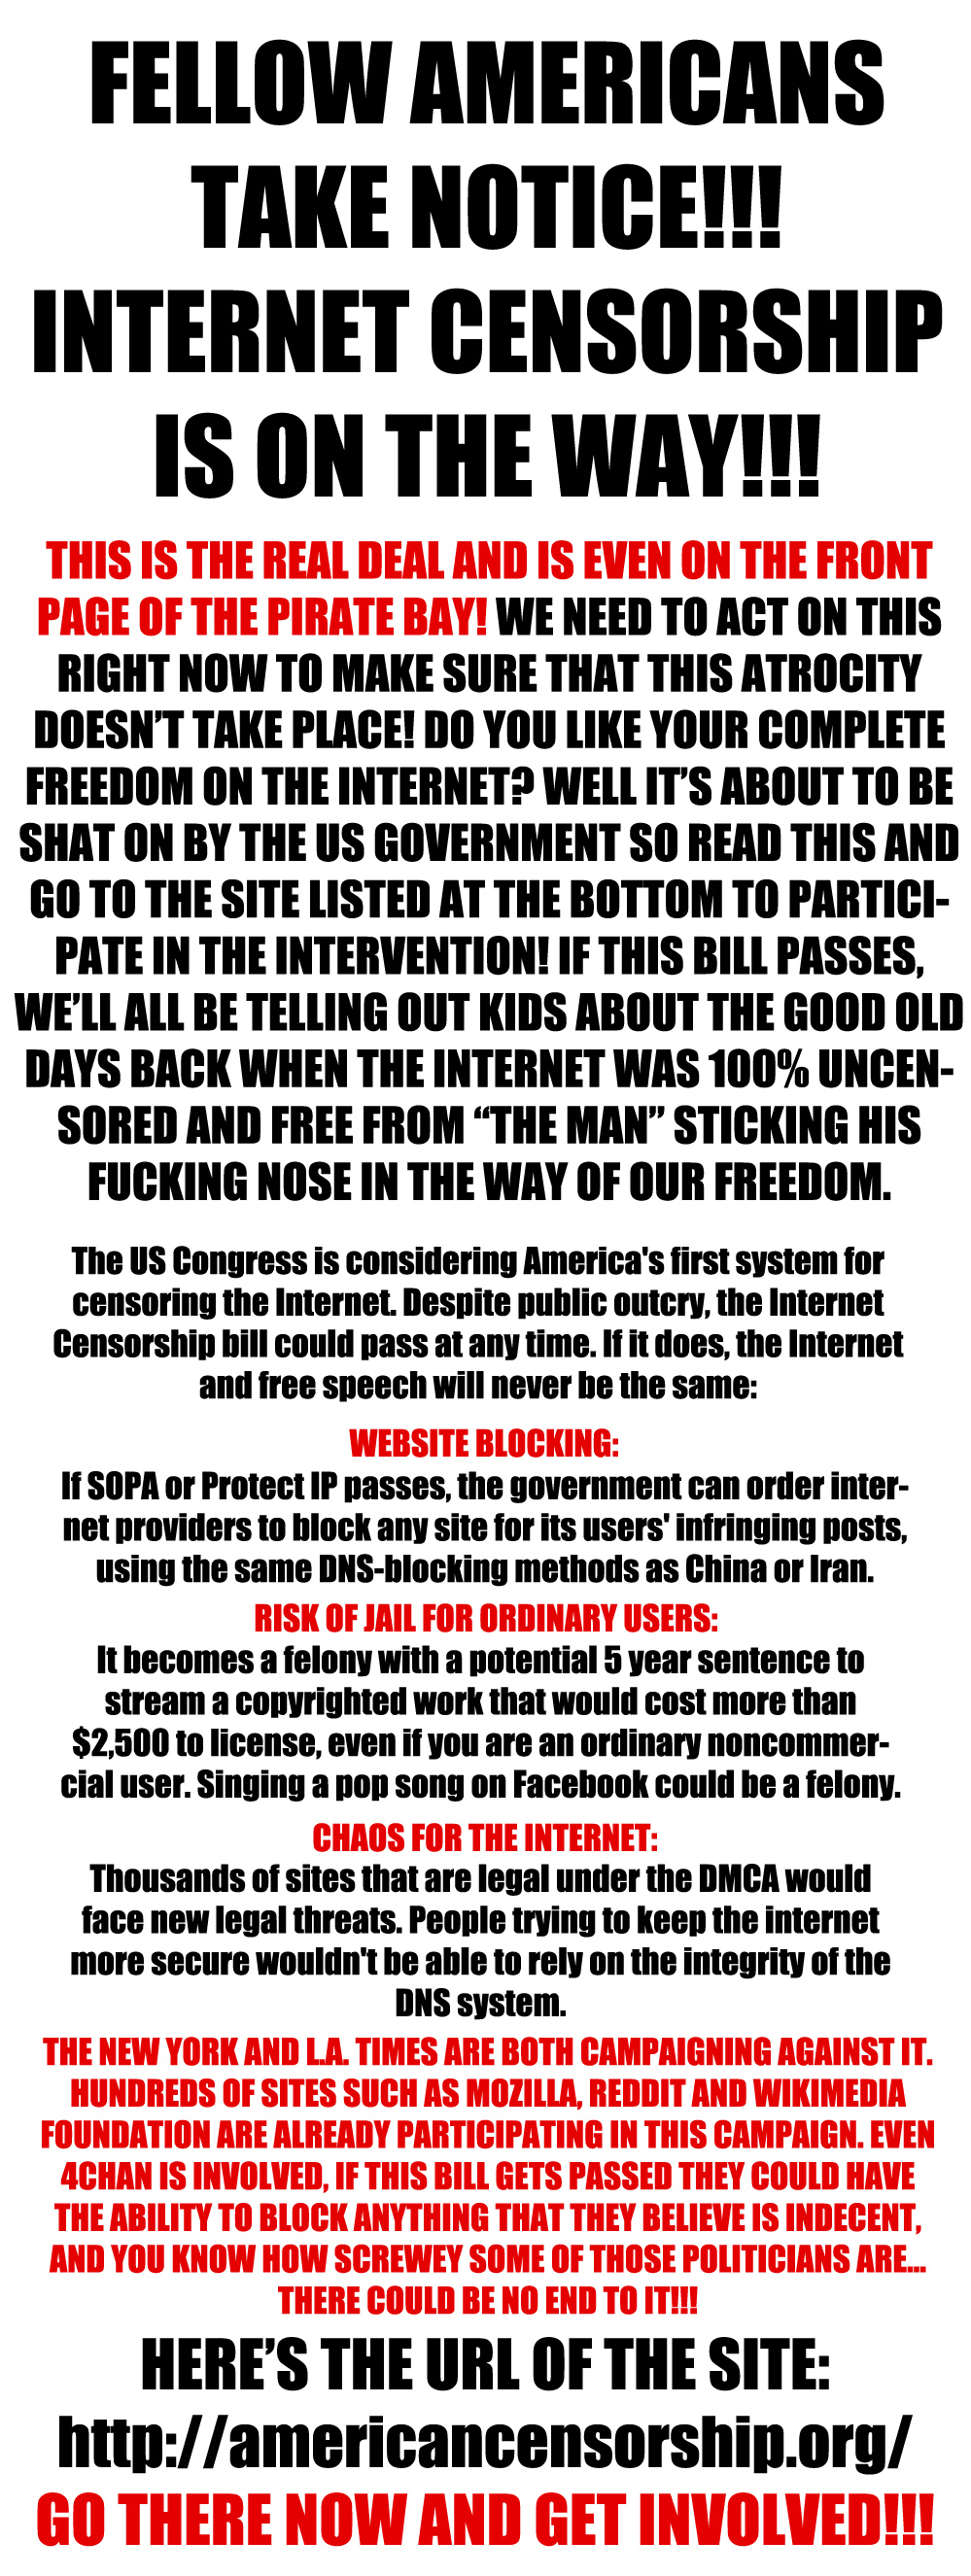 No fucking way are we gonna let them censor our beloved internet. This is almost a life or death feeling that we should have about this matter... this is absolutely huge! Take a stand people and beat those fuckers back where they belong, which is out of our business!!! This would change the country and society as we know it... bear your fangs and s